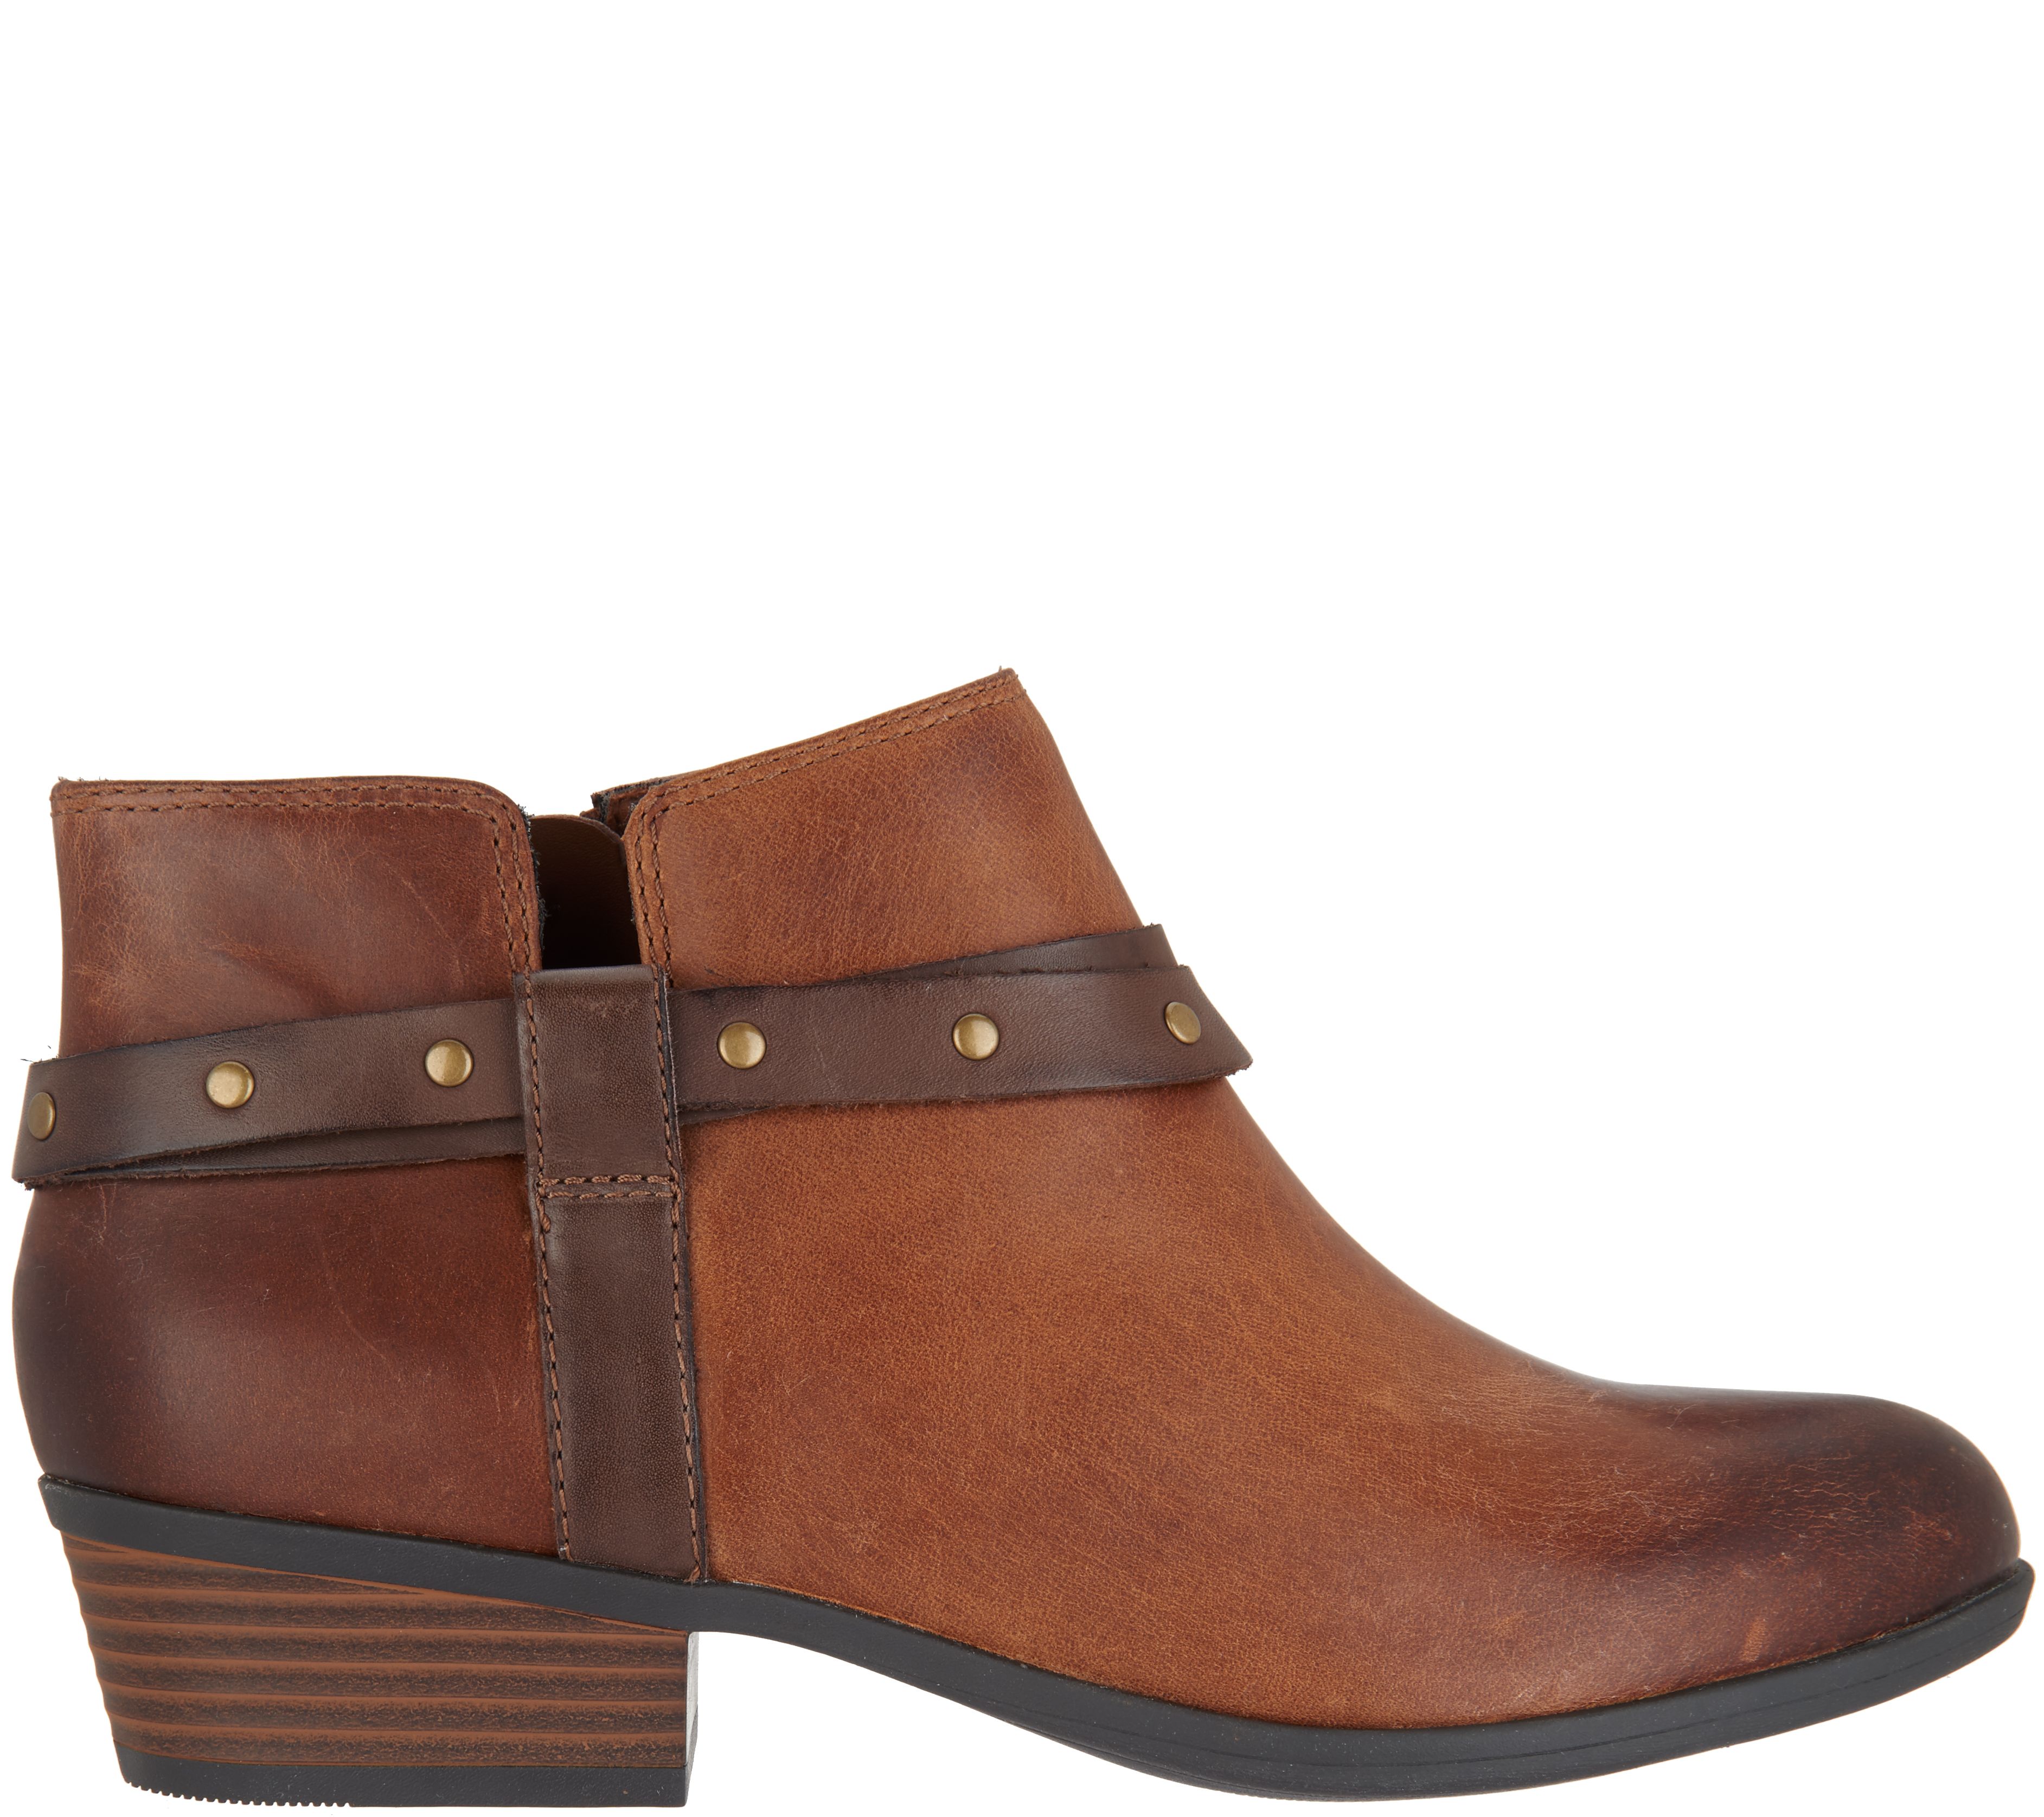 Clarks Leather Side Zip Boots - Addiy Zoie - QVC.com